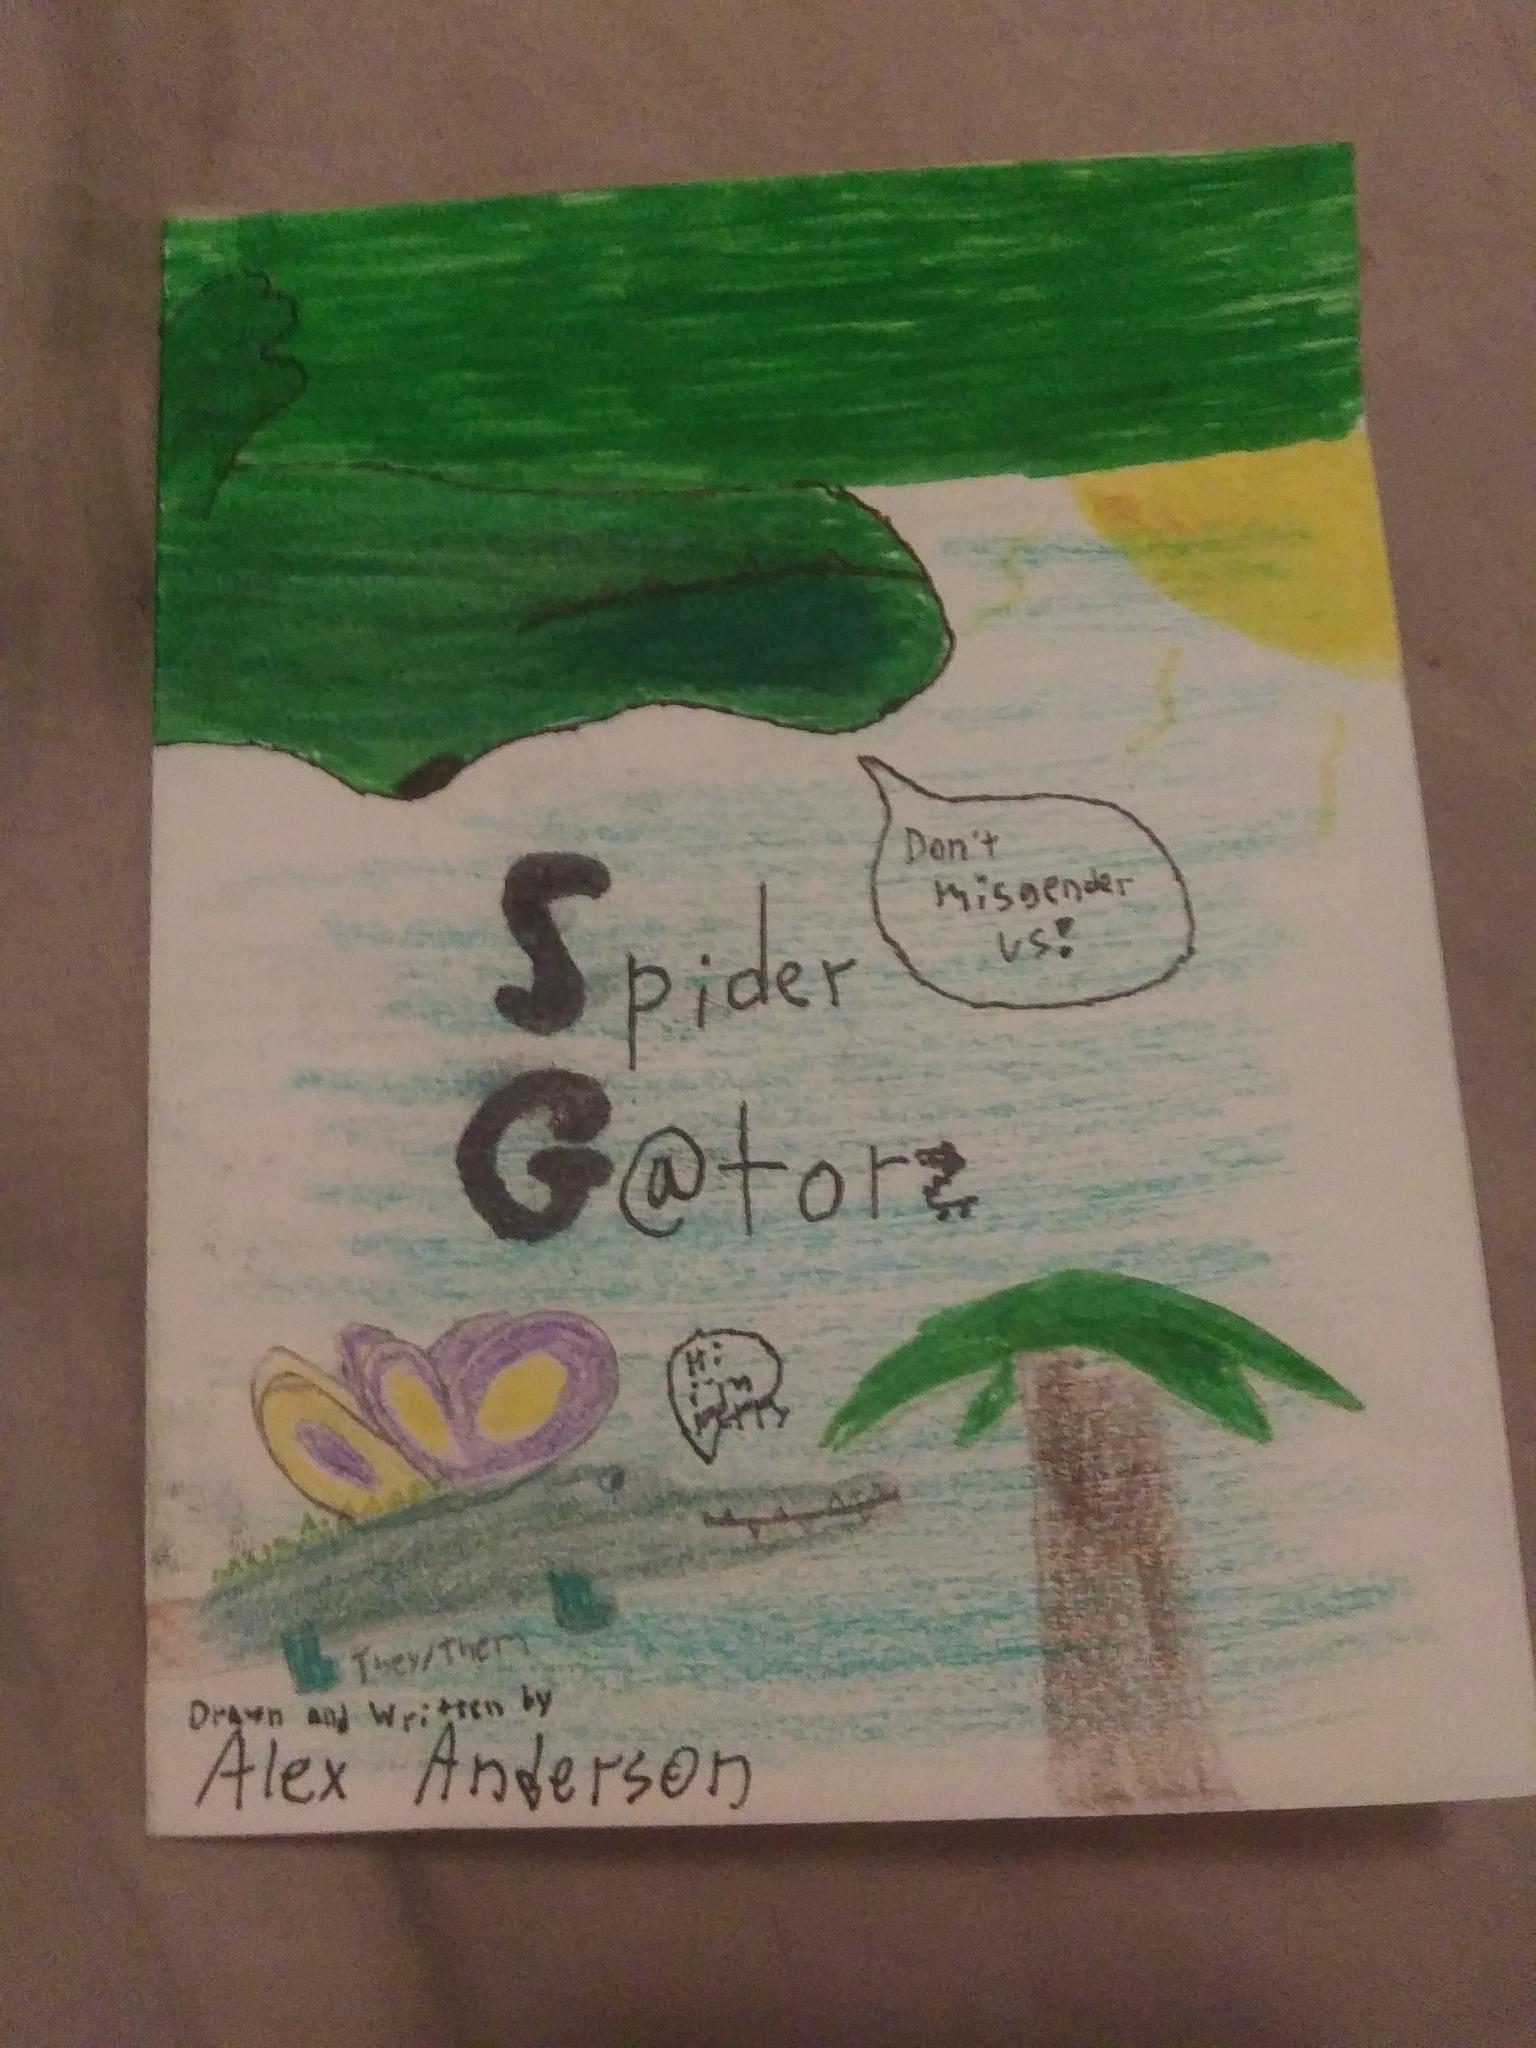 Spider Gatorz cover drawing